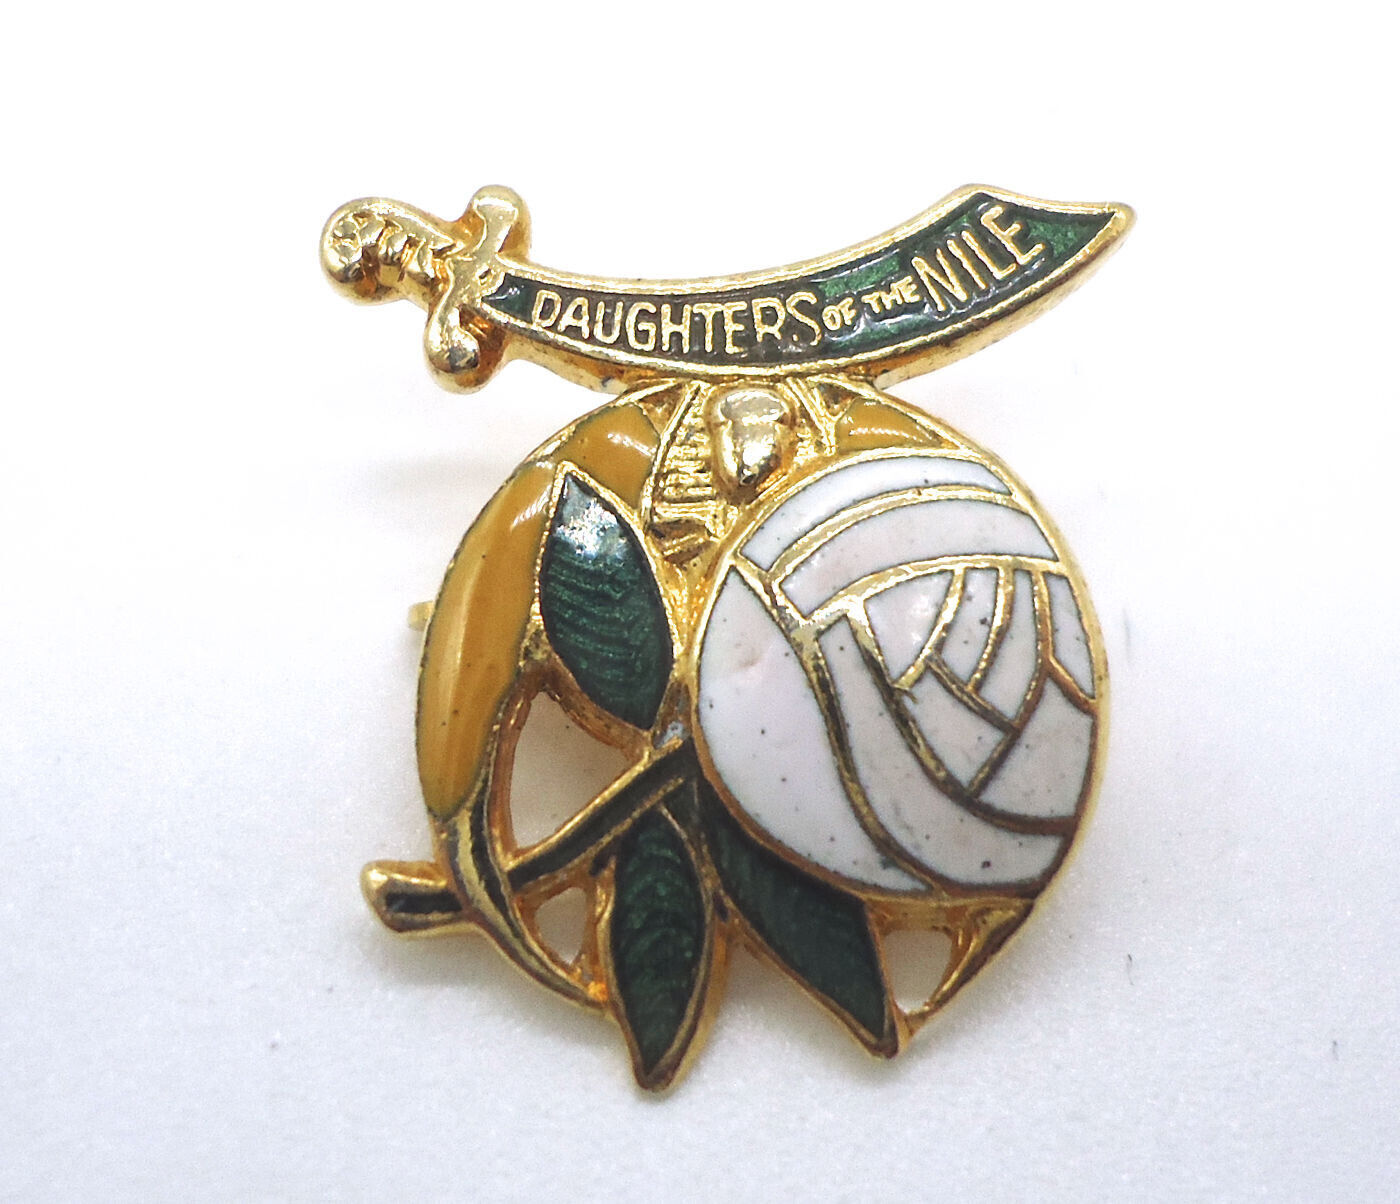 Vintage Shriners International Daughters Of The Nile Gold Tone Enamel Pin